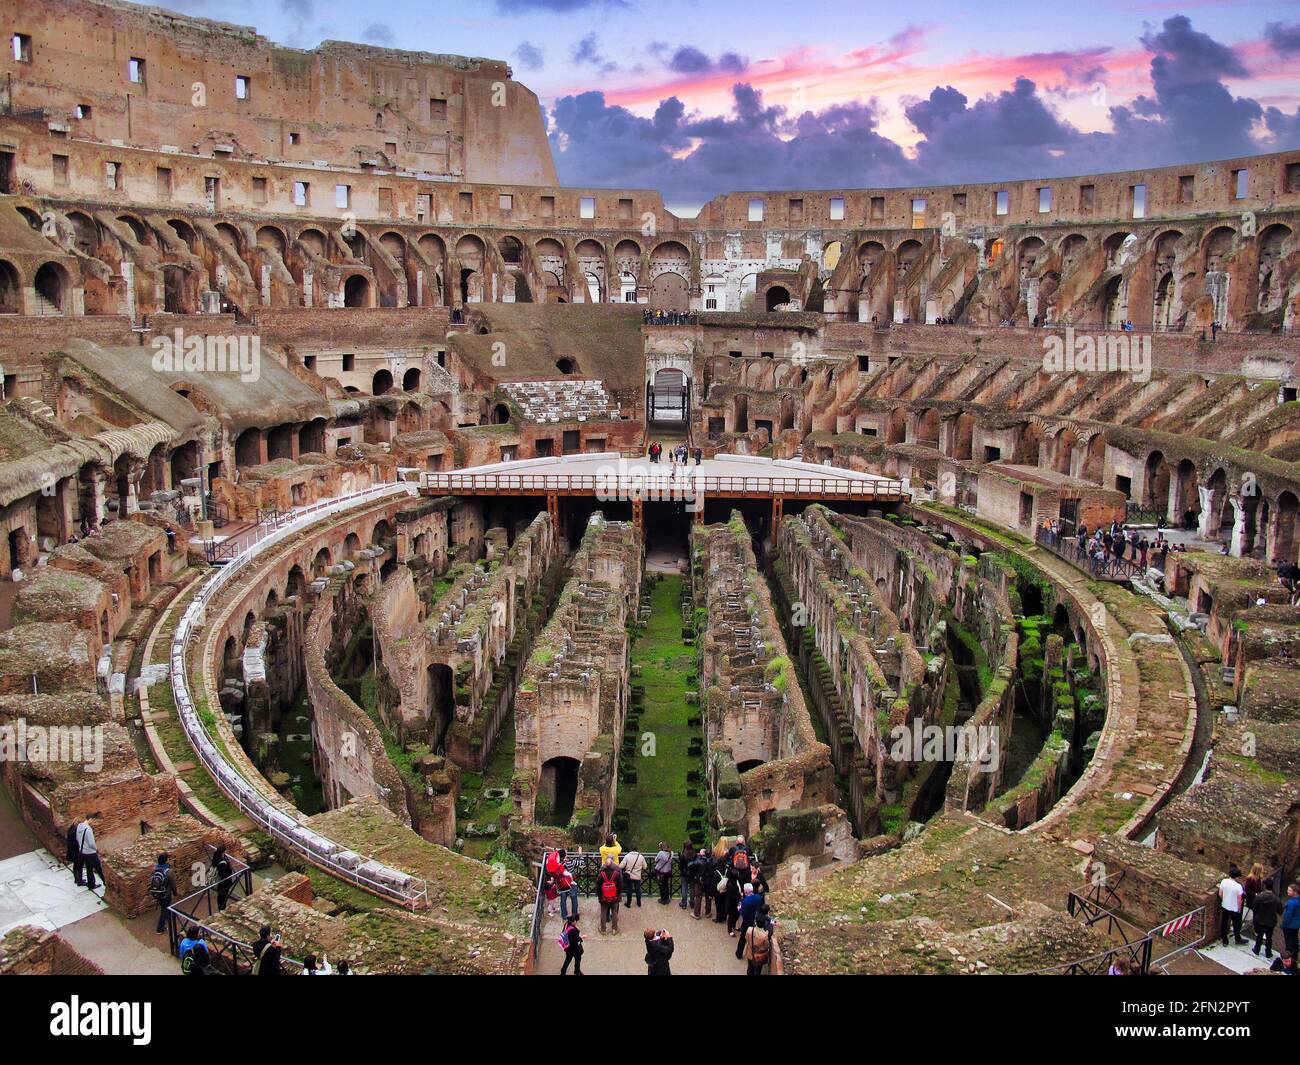 The Colosseum  - Colosseo - where the gladiators fought, one of the most famous monuments and buildings and sights of ancient Rome Stock Photo